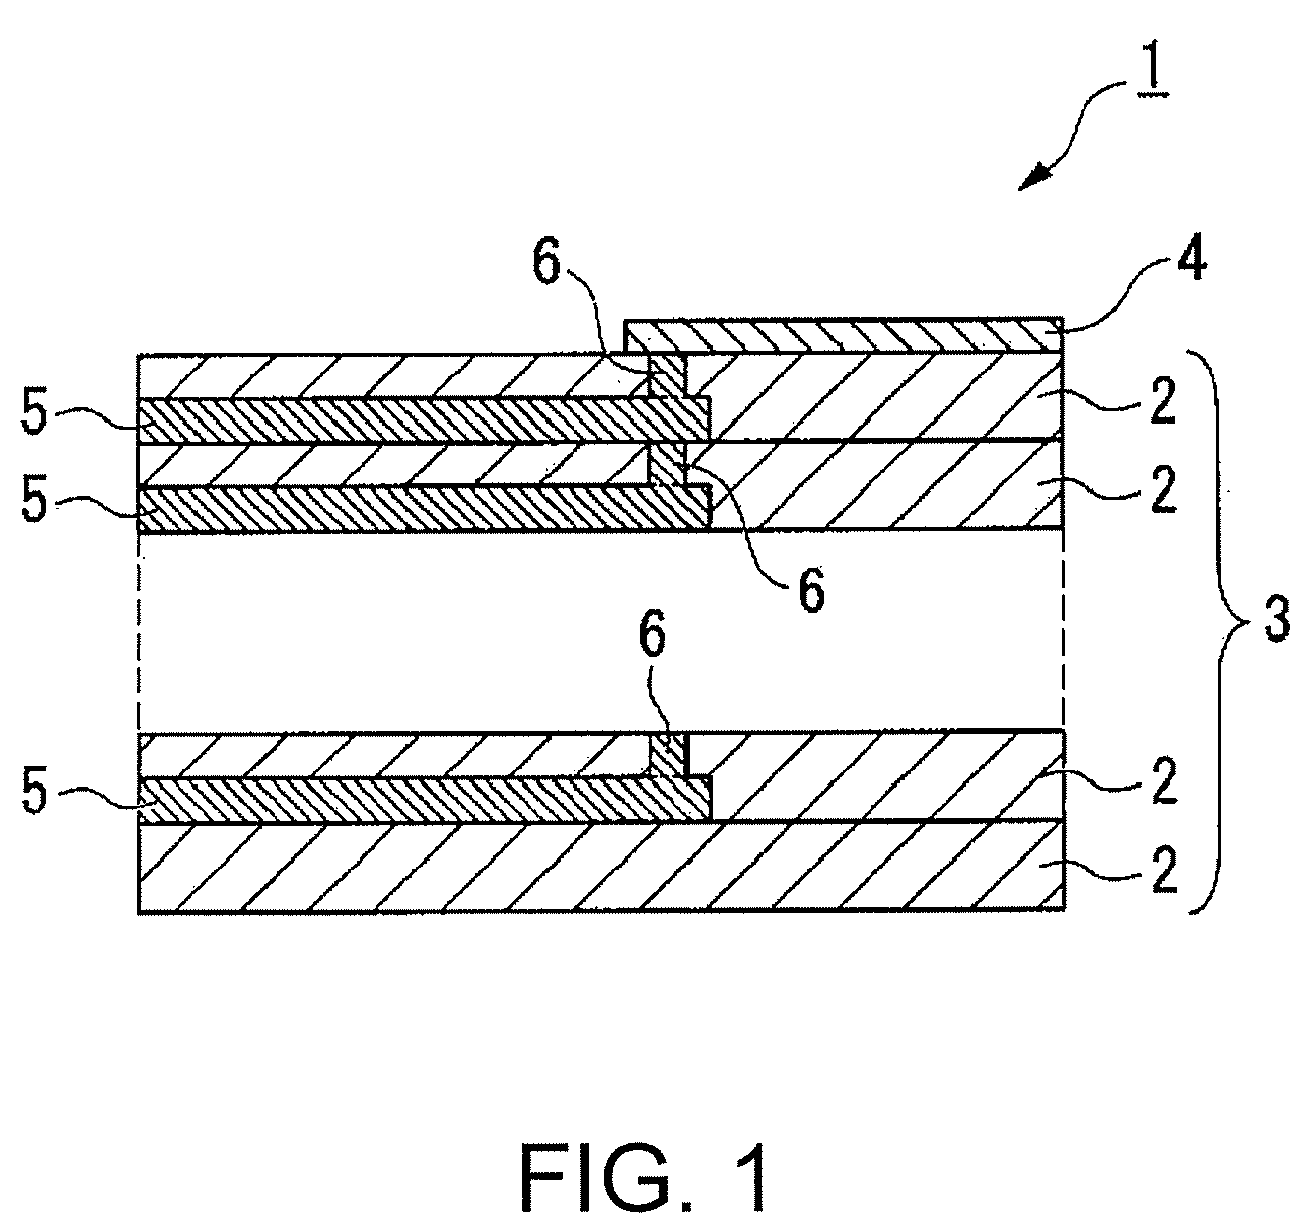 Conductive pattern forming ink, conductive pattern, and wiring substrate